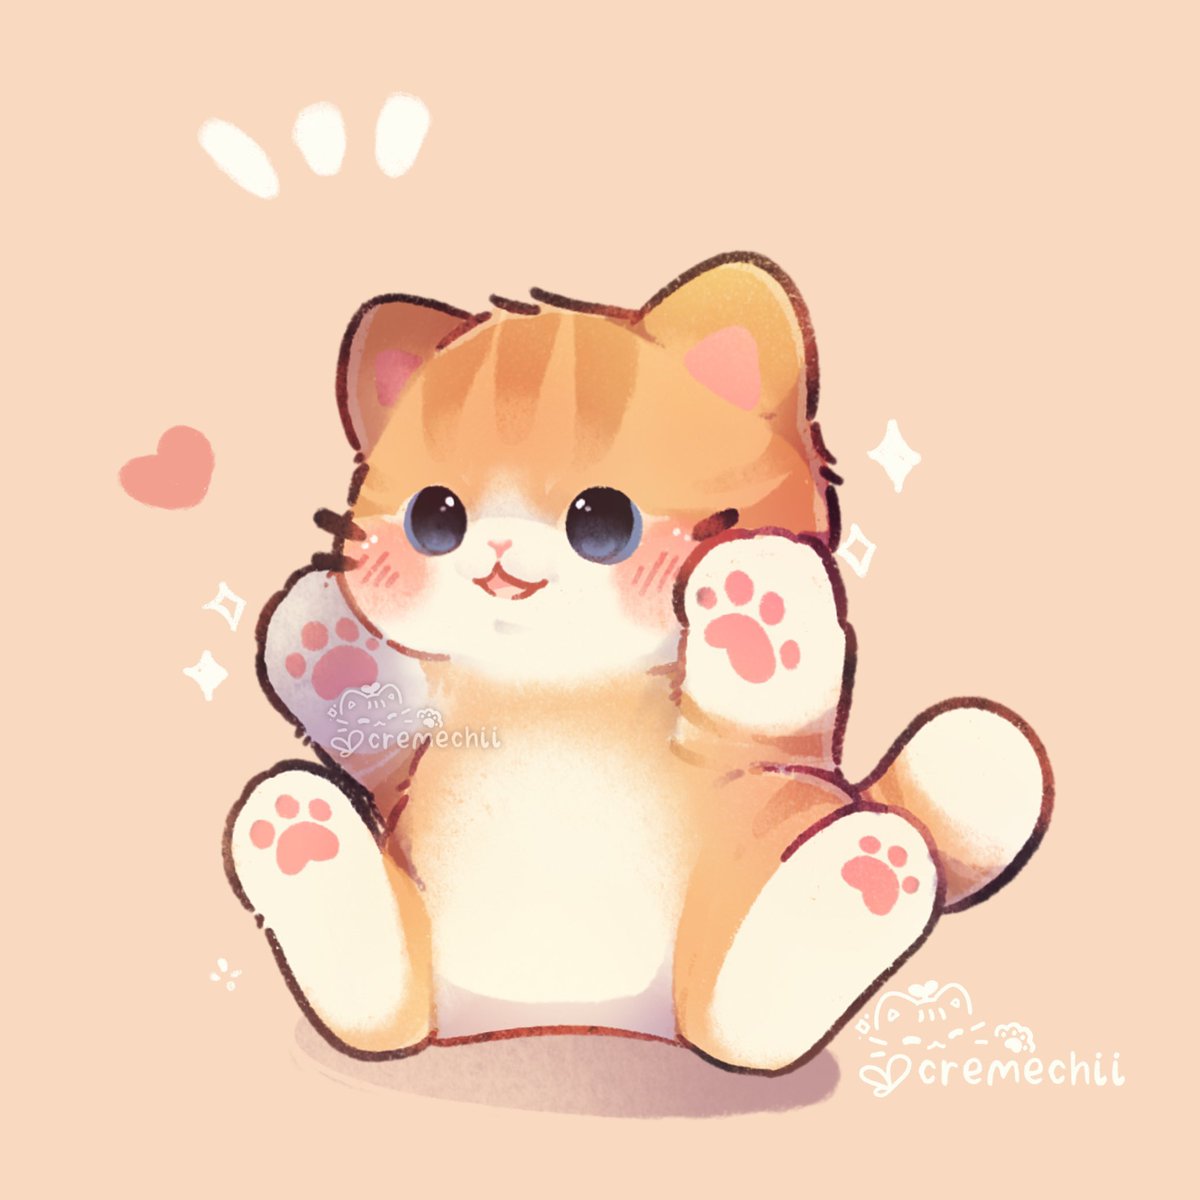 「Toe beans」|Chii🌻のイラスト